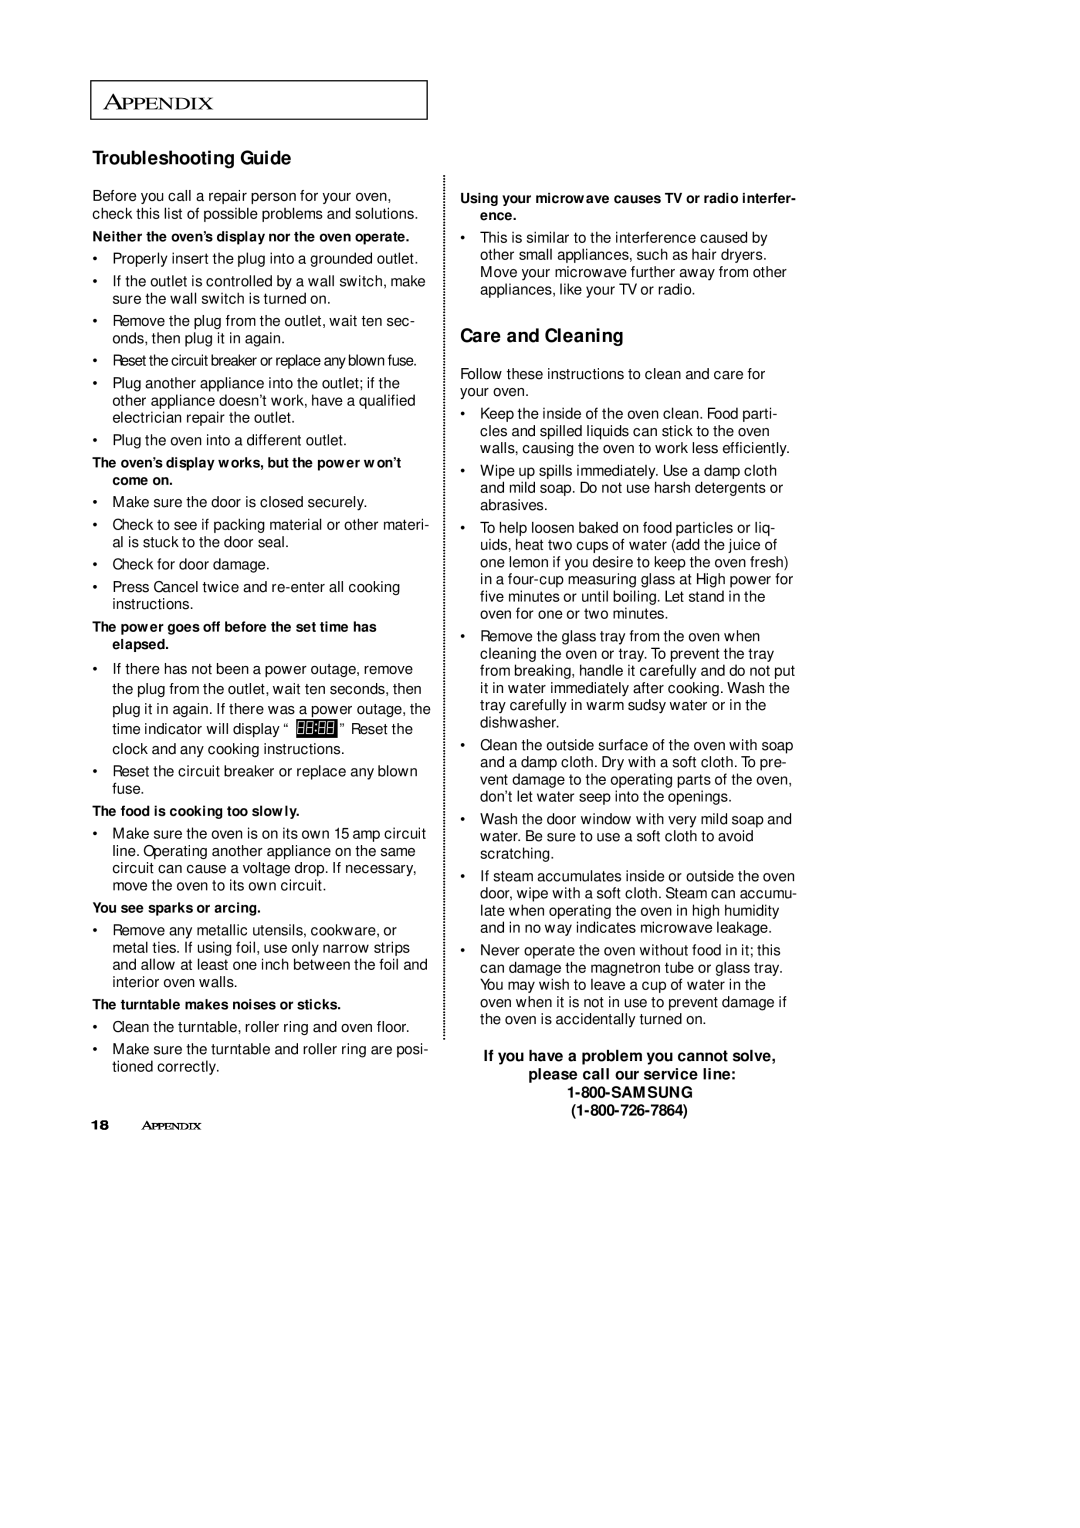 Samsung MW4688BA, MW4699S owner manual Troubleshooting Guide, Care and Cleaning, Appendix 